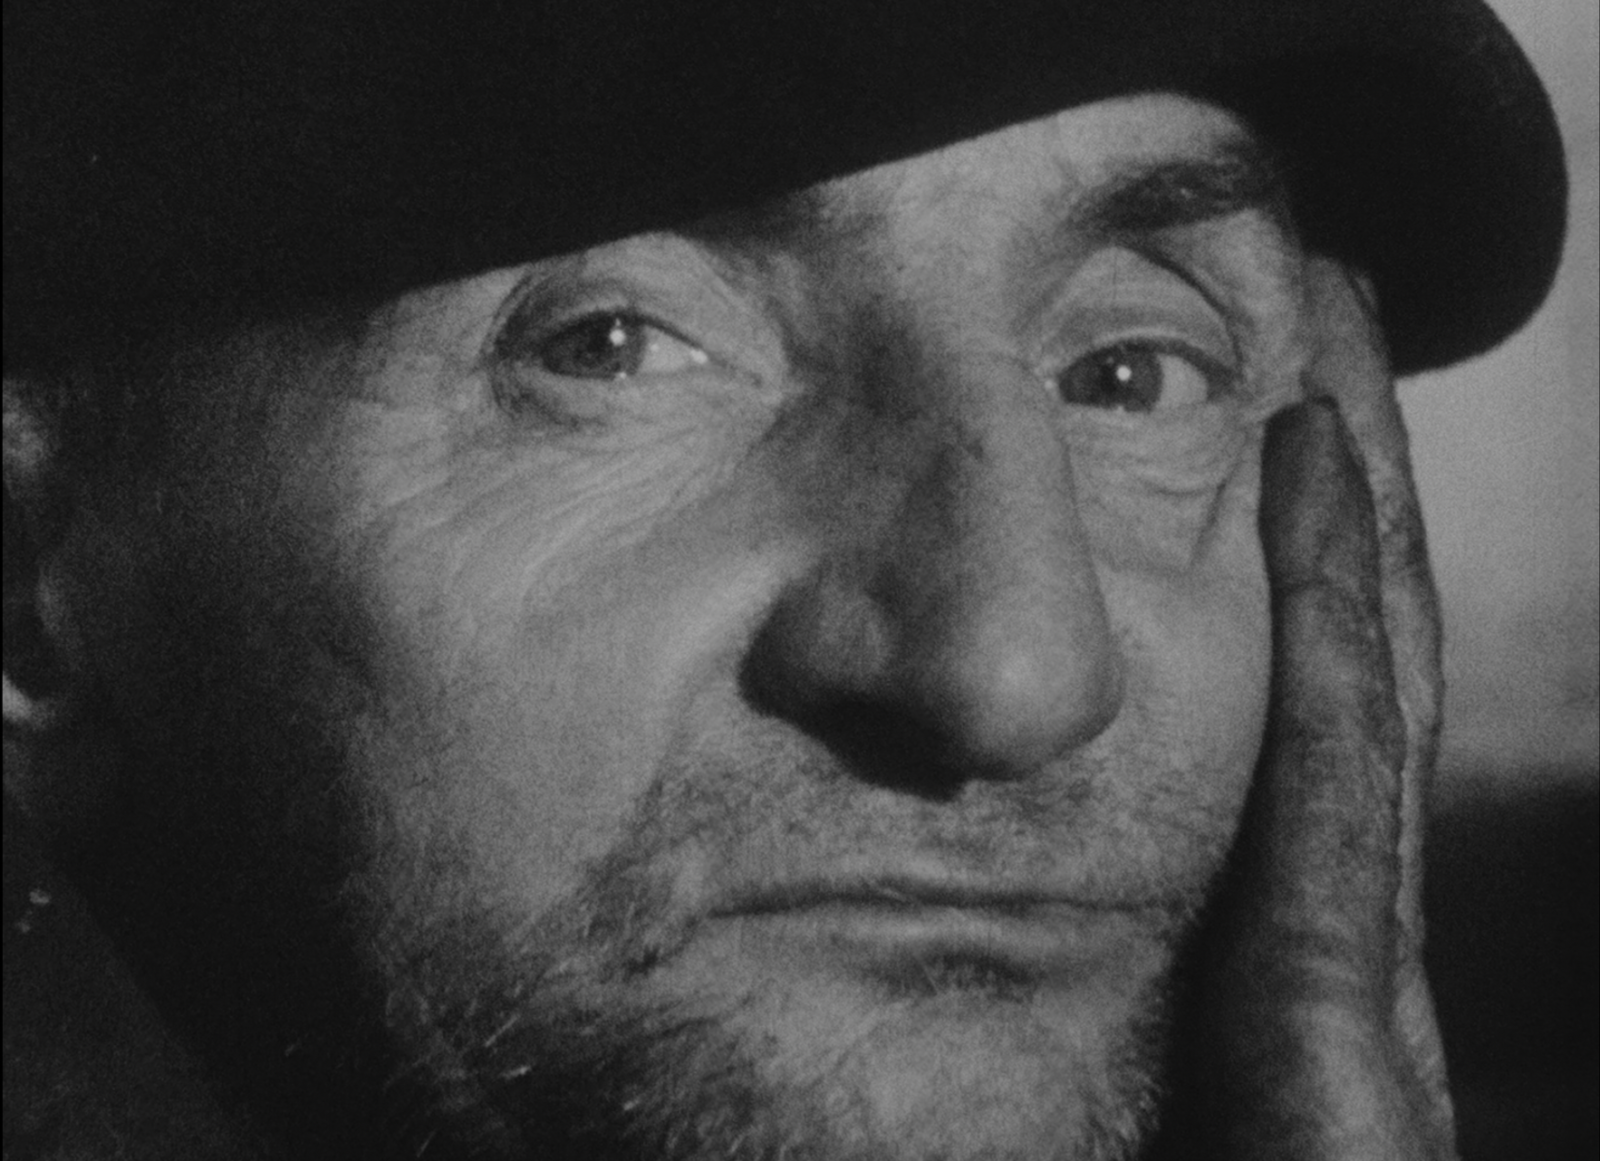 A still from Agnès Varda's black-and-white 1958 film, L’Opéra-Mouffe. A close-up of an aging man with stubble in a beret. He looks into the camera, a serious expression on his face.